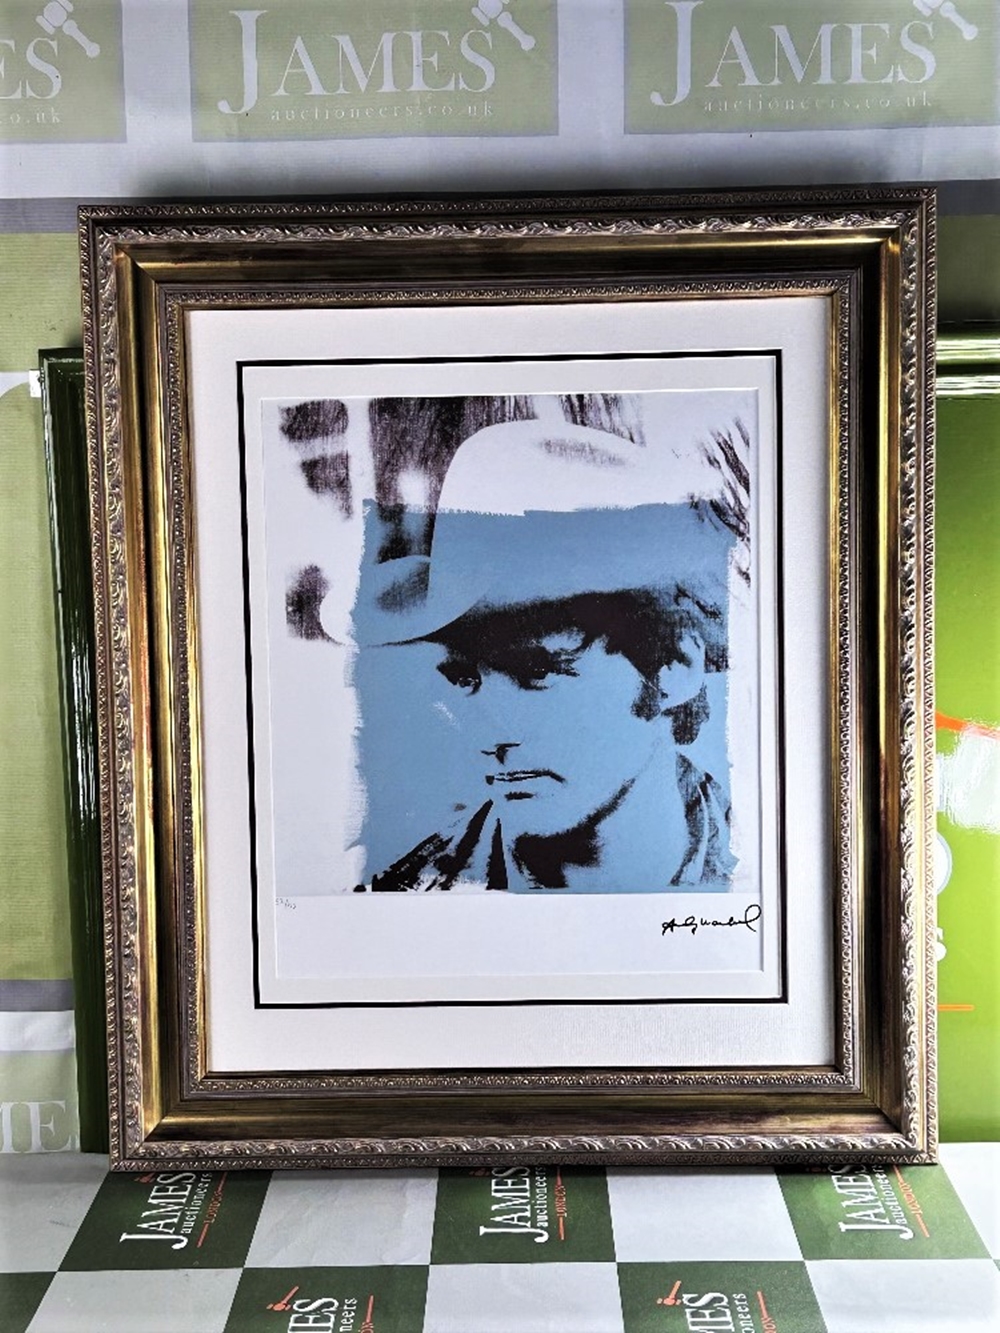 Andy Warhol (1928-1987) Dennis Hopper Numbered Lithograph